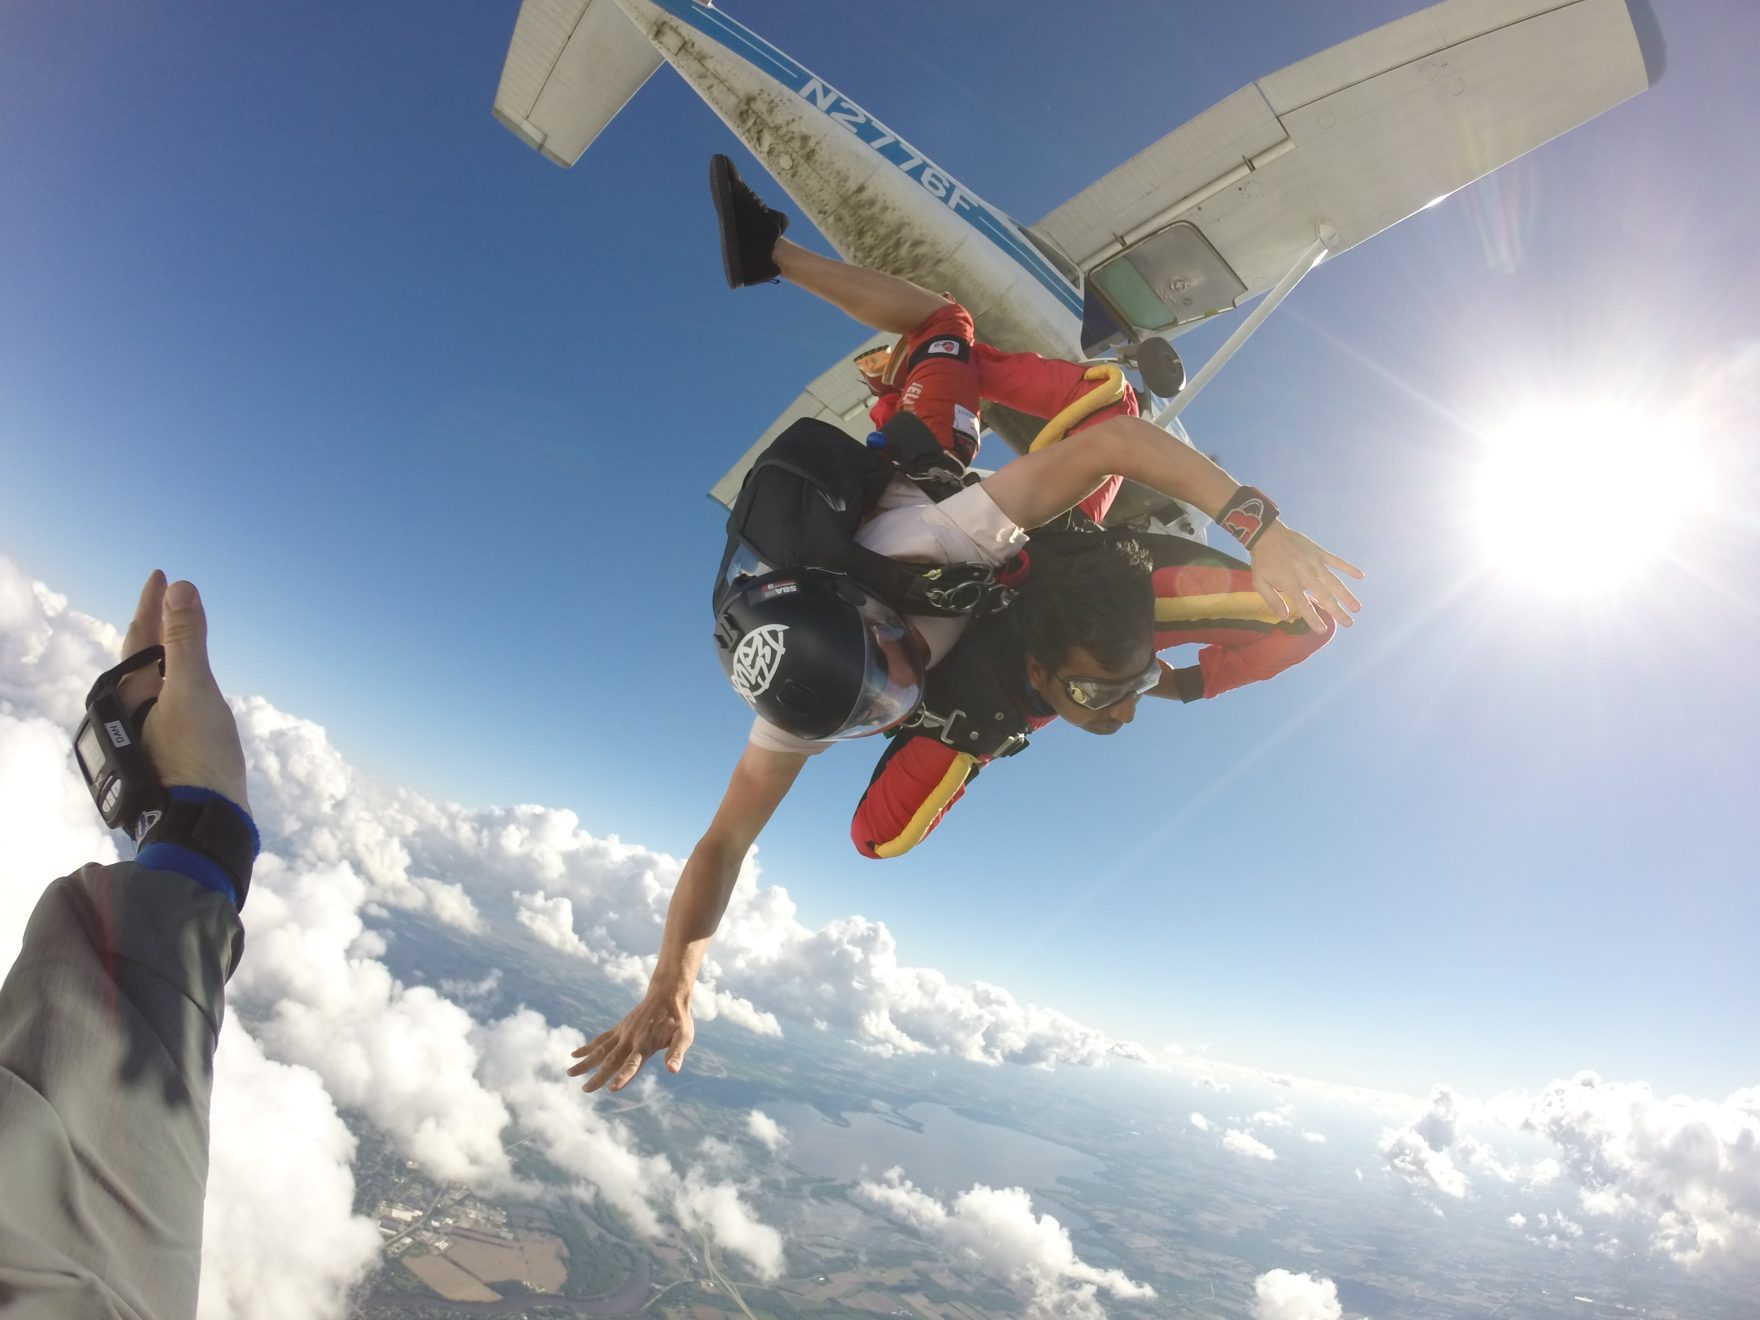 Number of Skydiving Deaths Per Year Wisconsin Skydiving Center